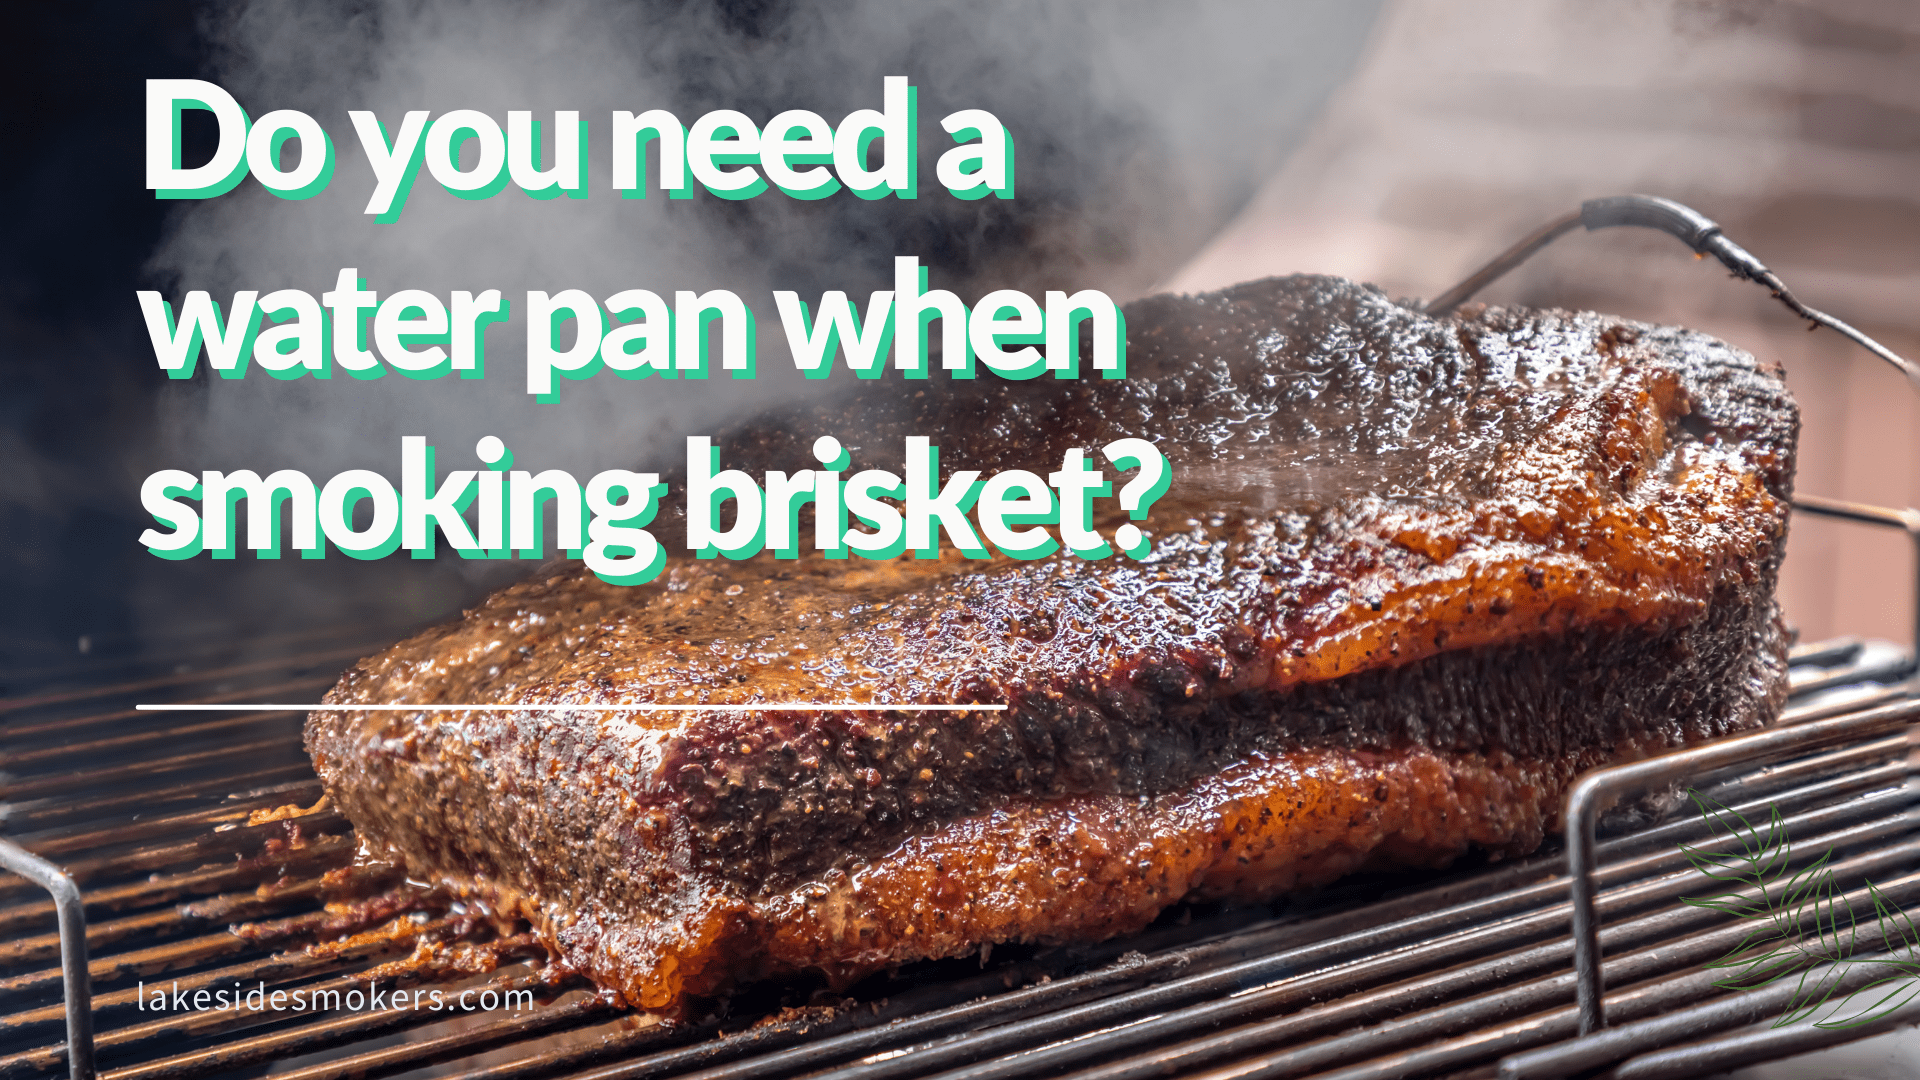 Do you need a water pan when smoking brisket? Absolutely!